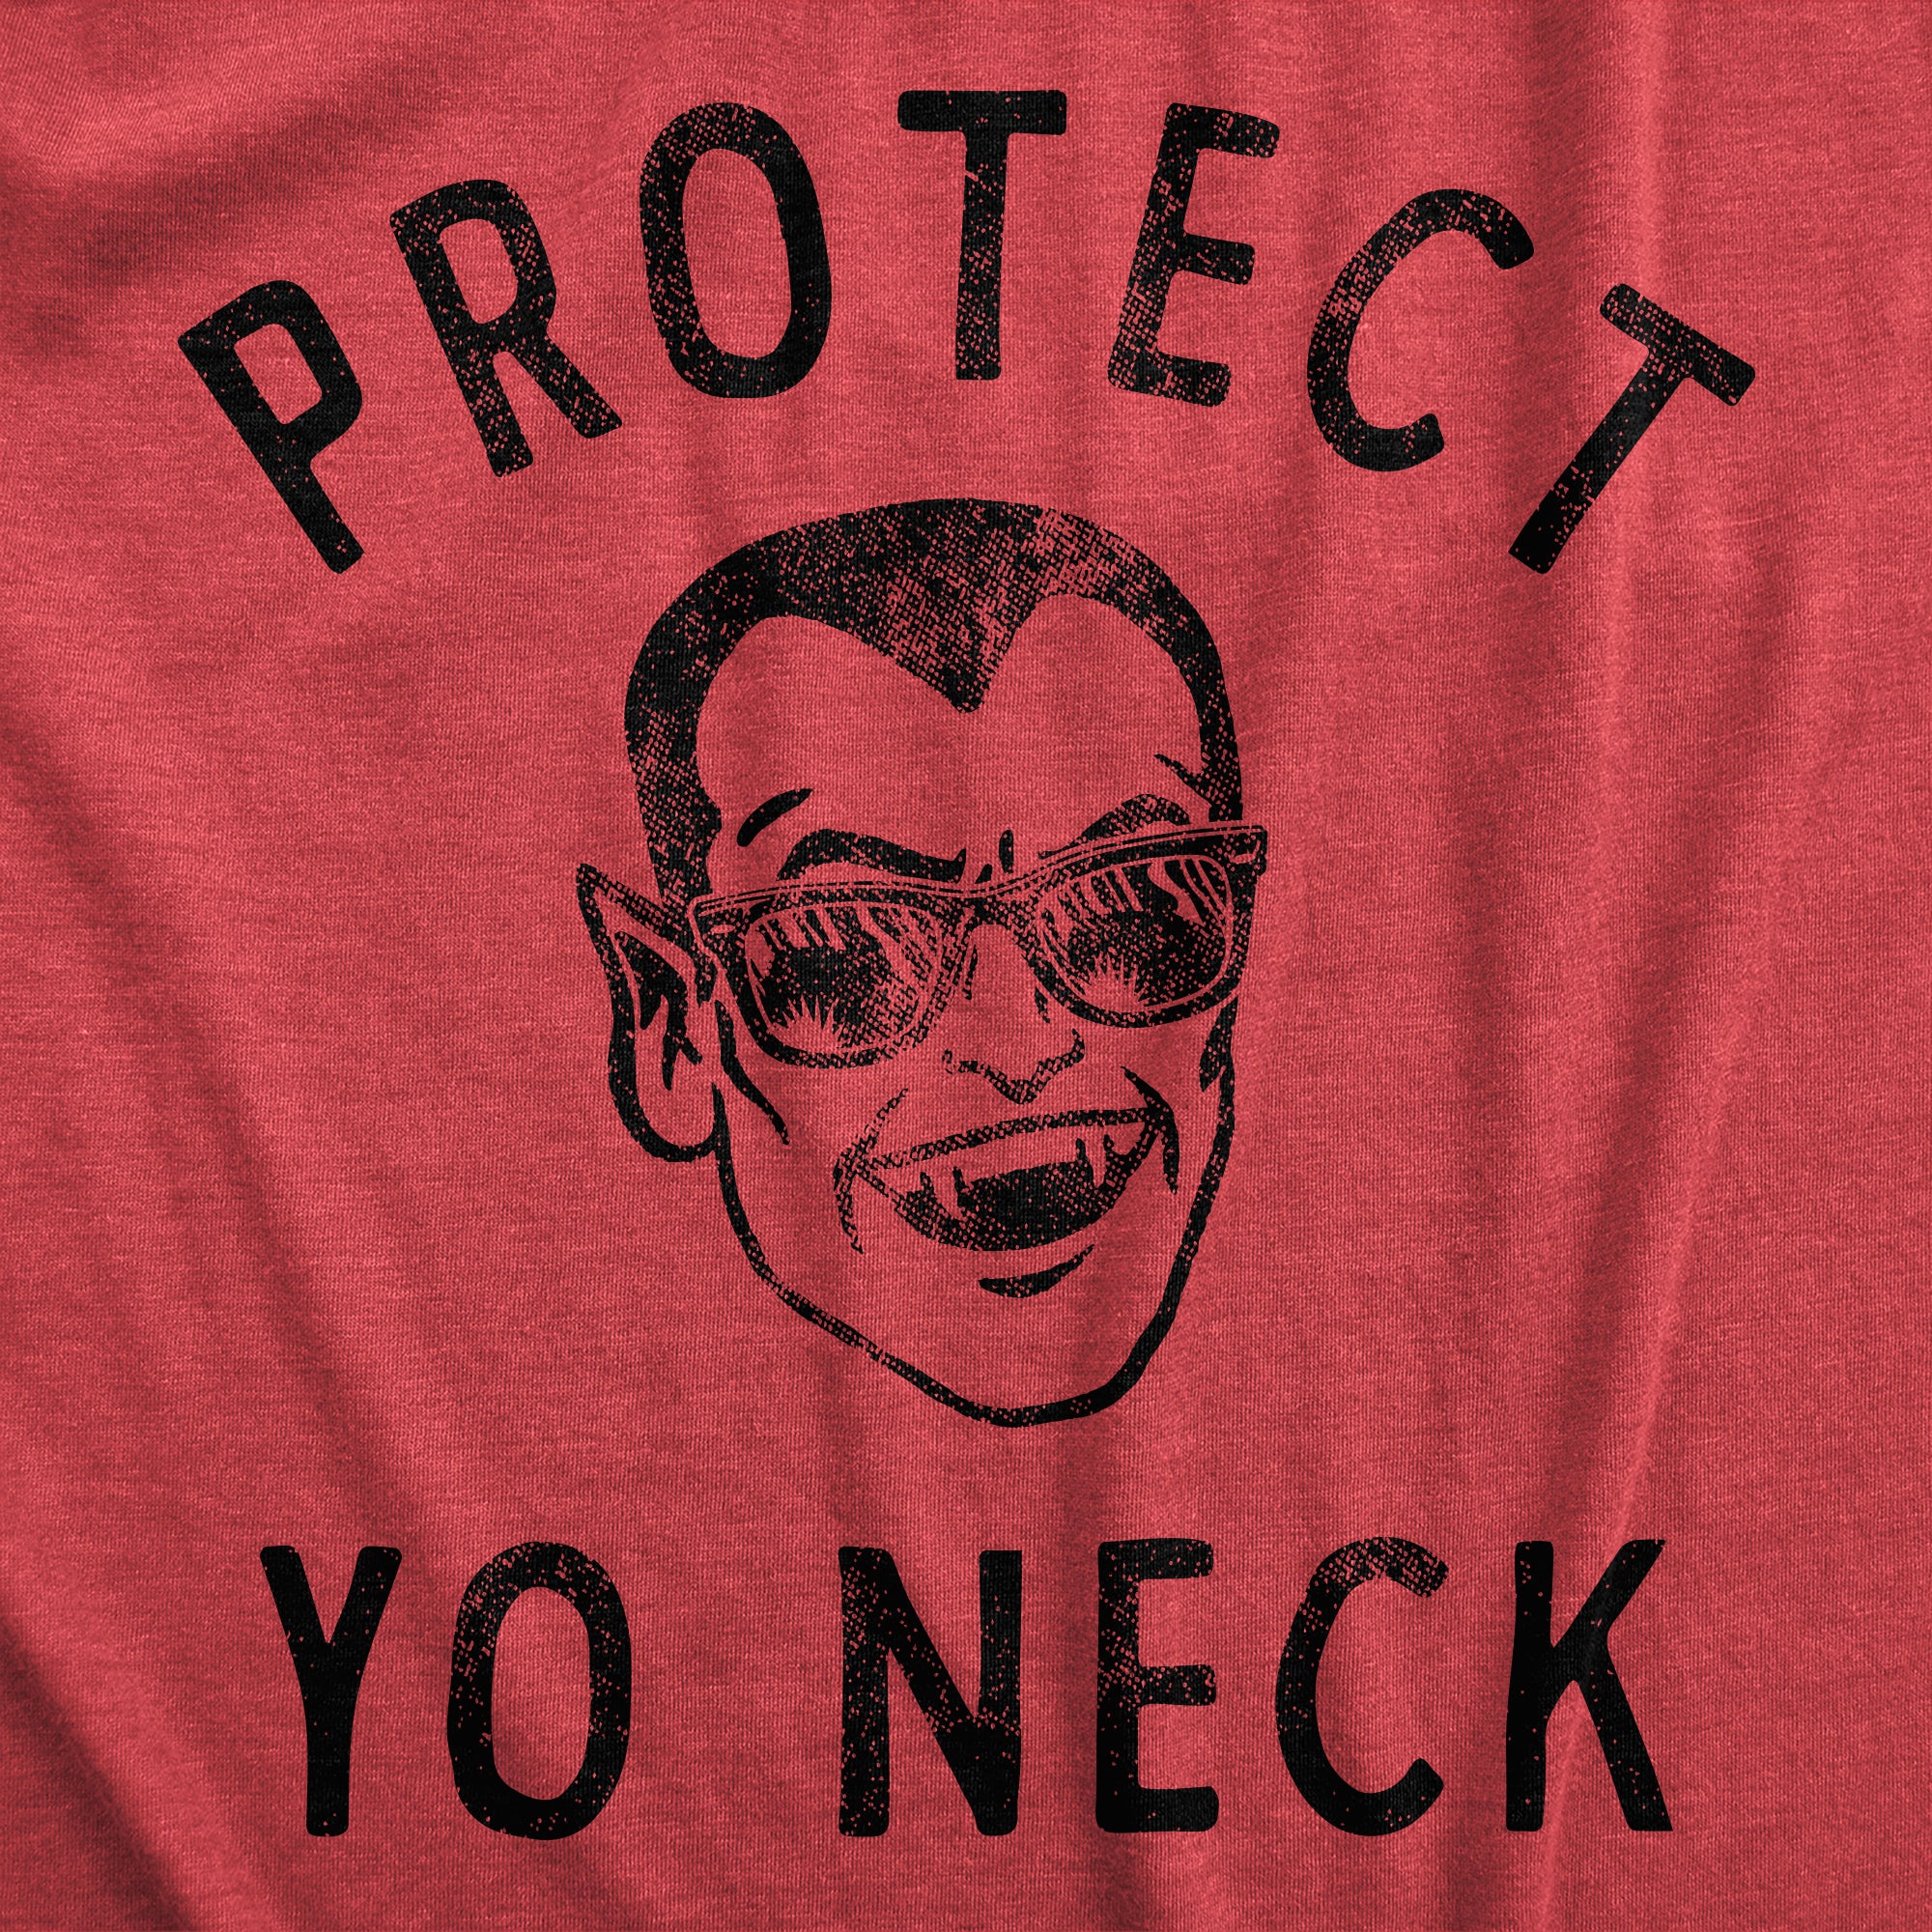 Funny Heather Red Protect Yo Neck Womens T Shirt Nerdy Halloween Sarcastic Tee